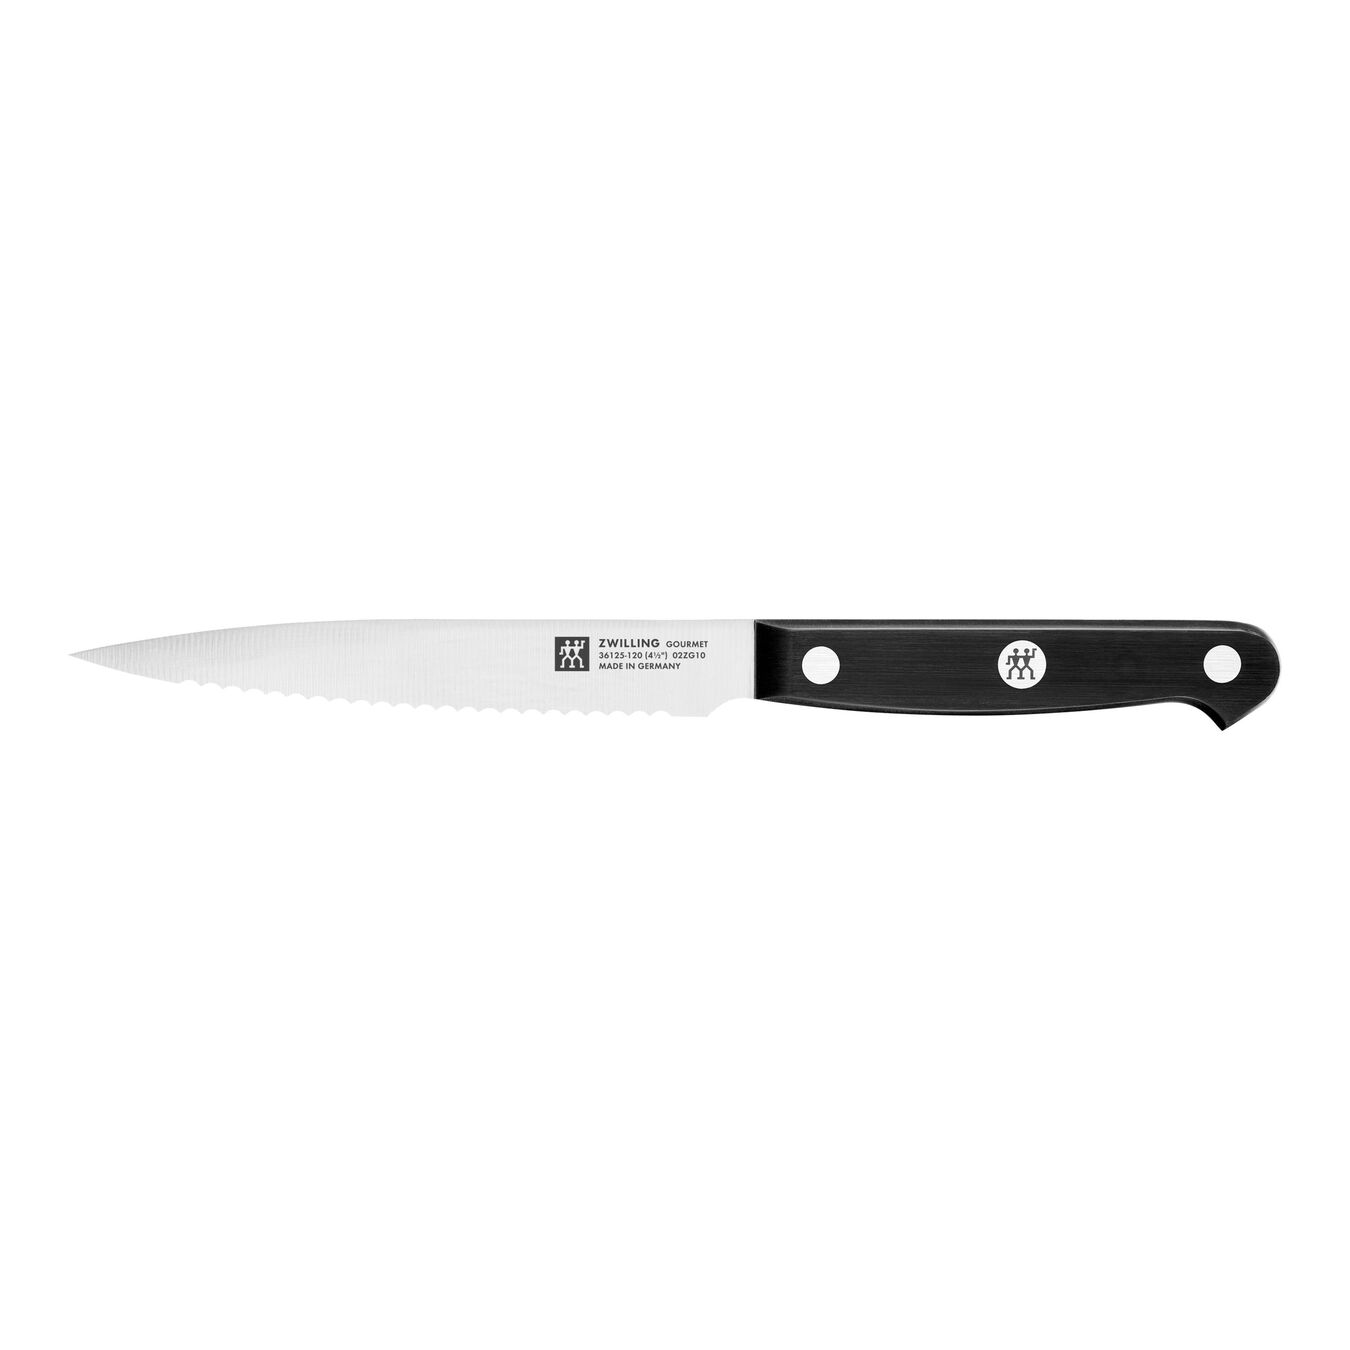 4.5-inch, Serrated Paring Knife,,large 1